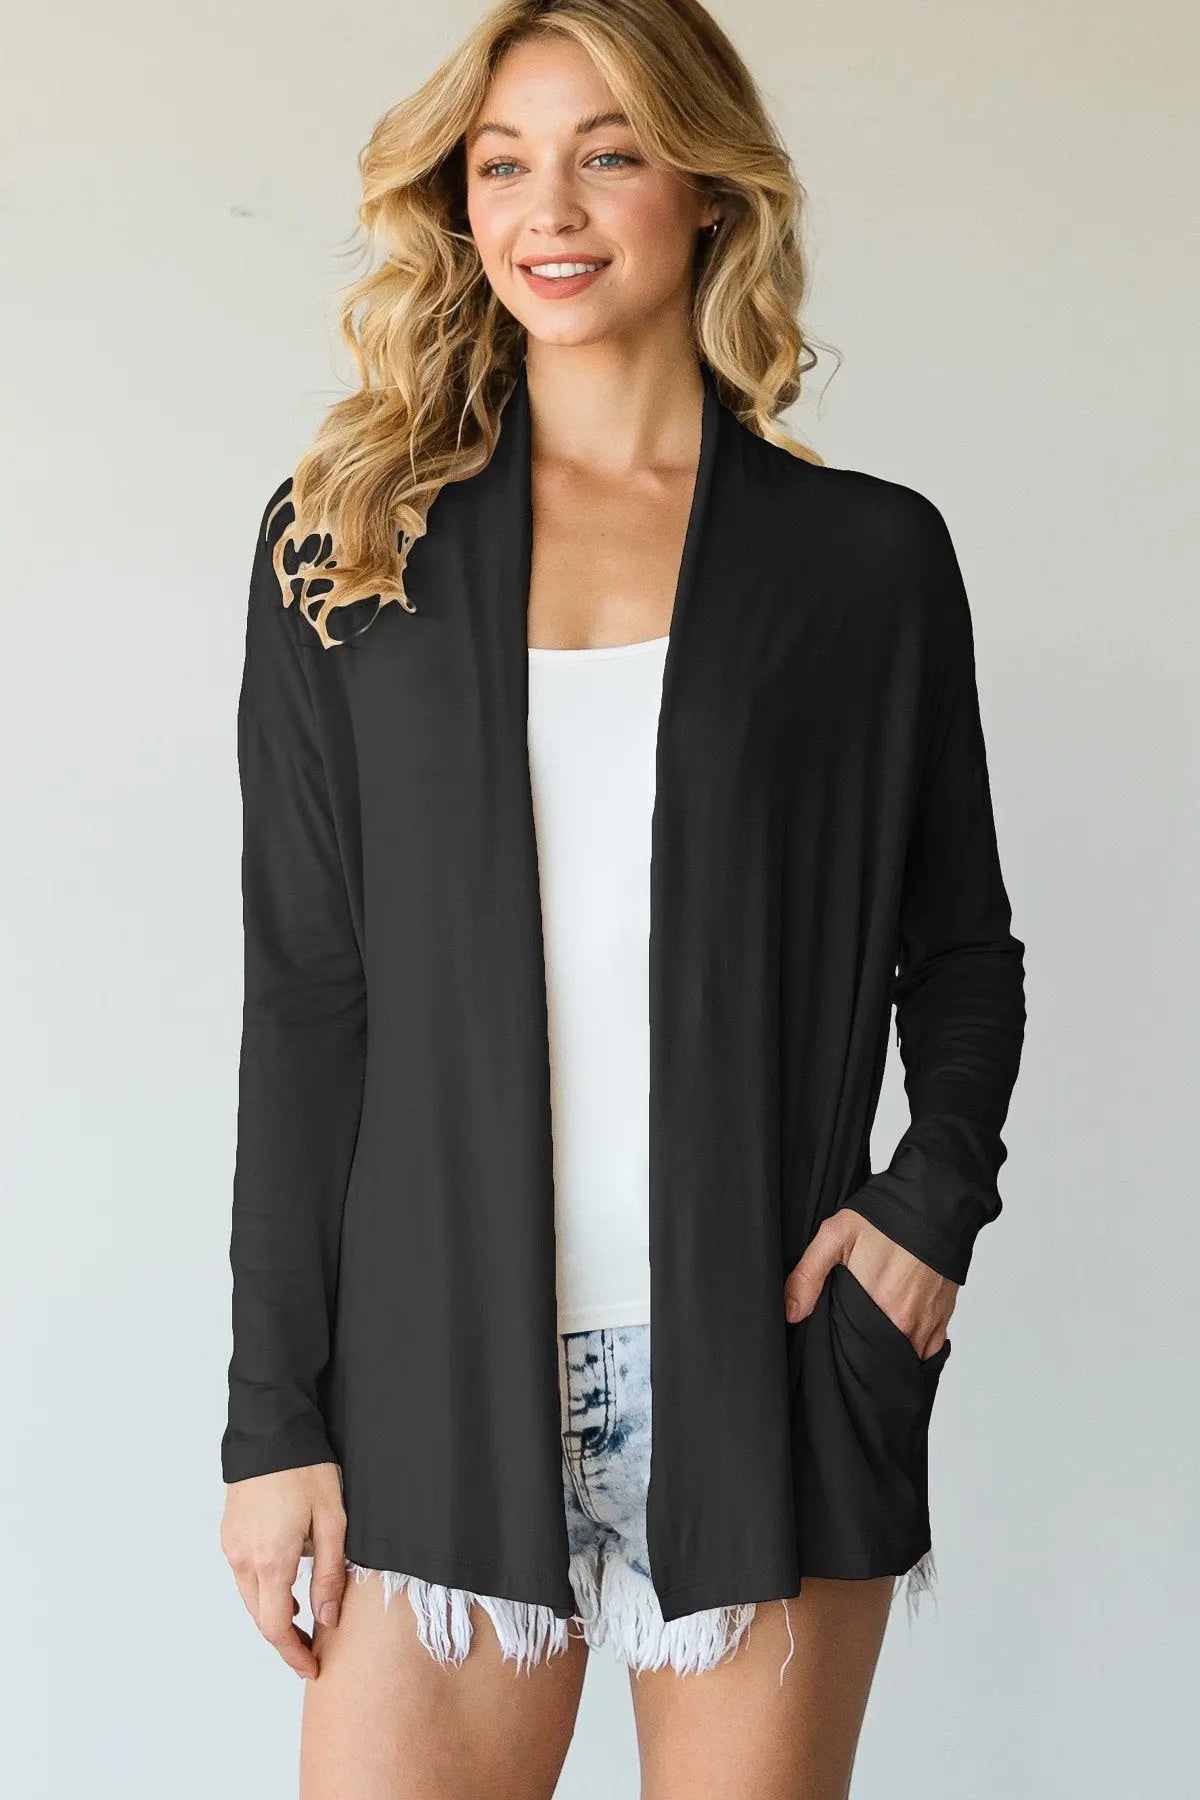 Casual Cardigan Featuring Collar And Side Pockets Sunny EvE Fashion